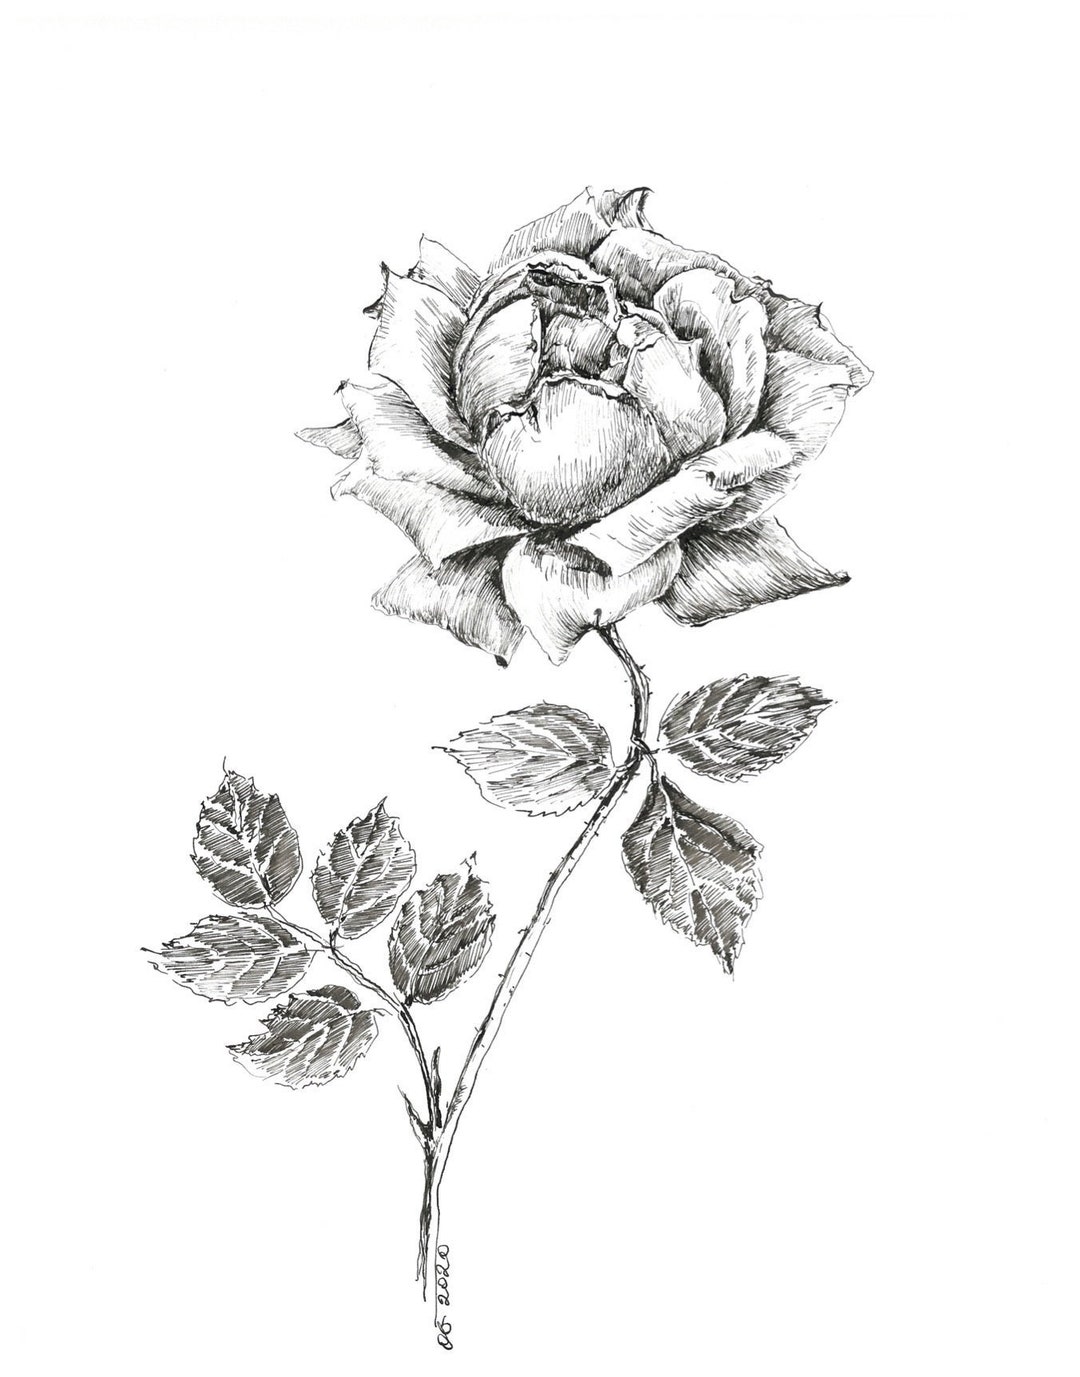 Having too much fun with this pen rose pen drawing pa  Flickr